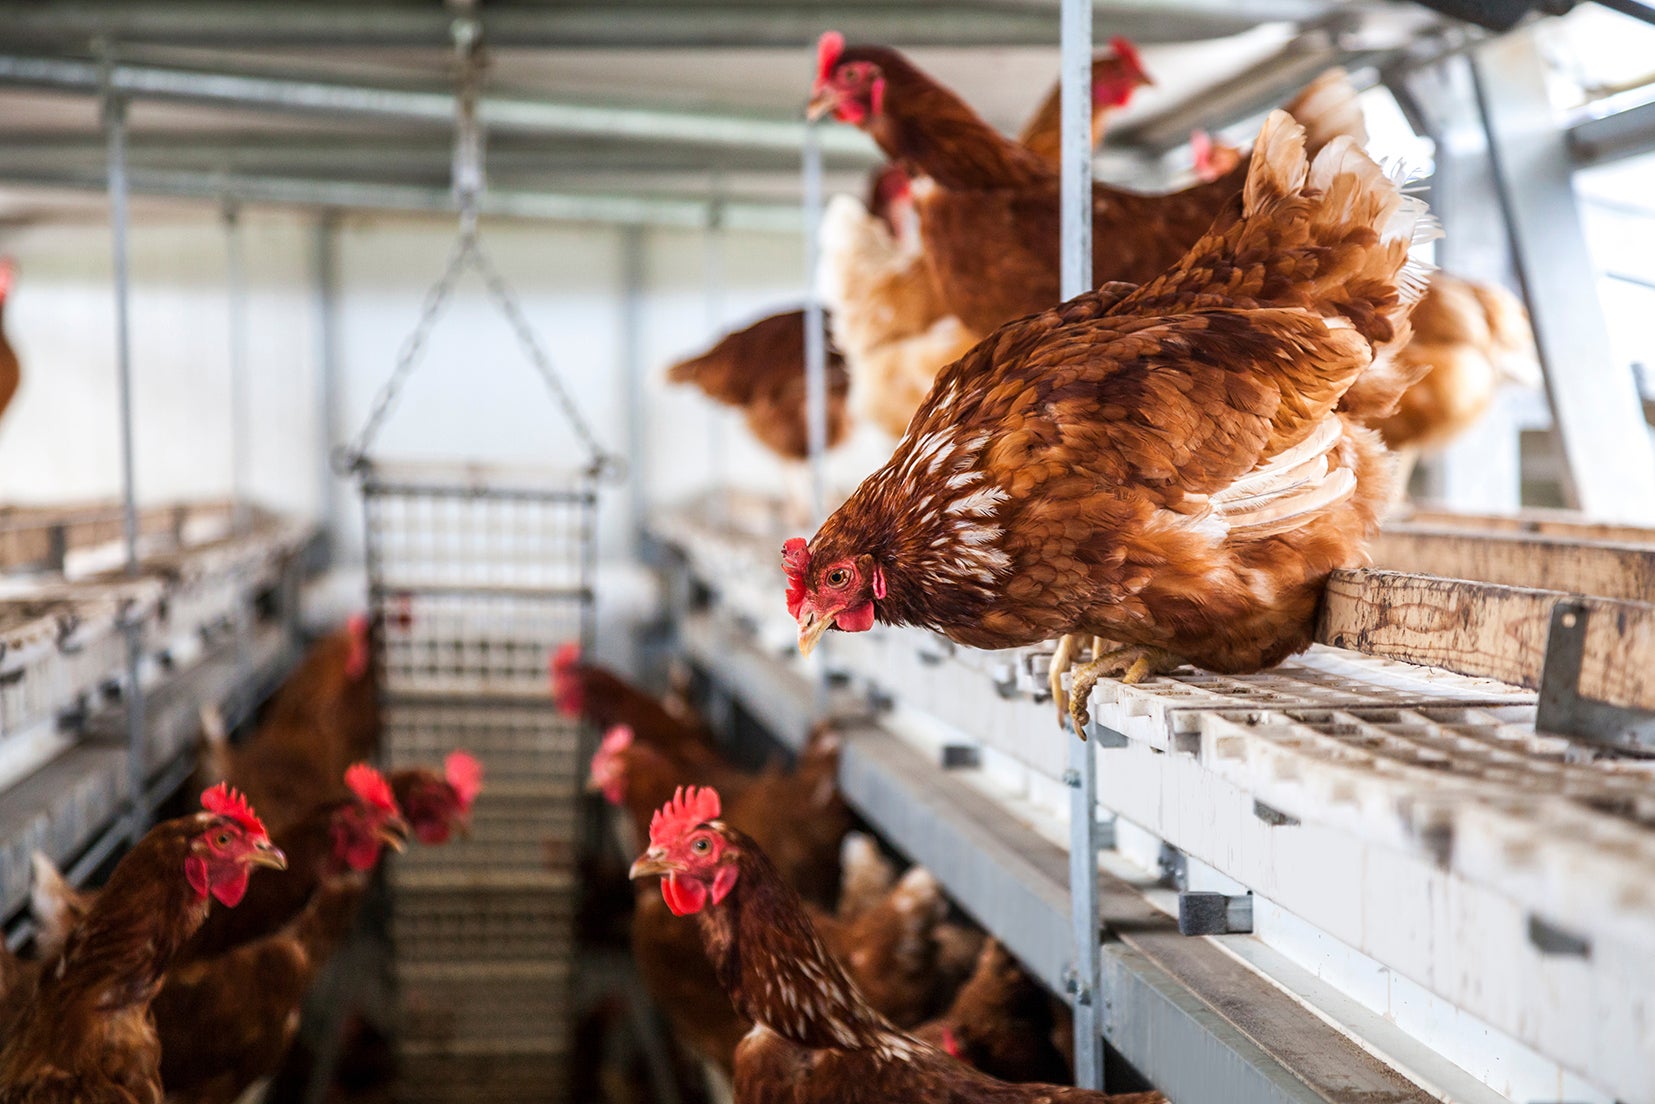 Products, Resources and Programs for Healthy Poultry|Elanco